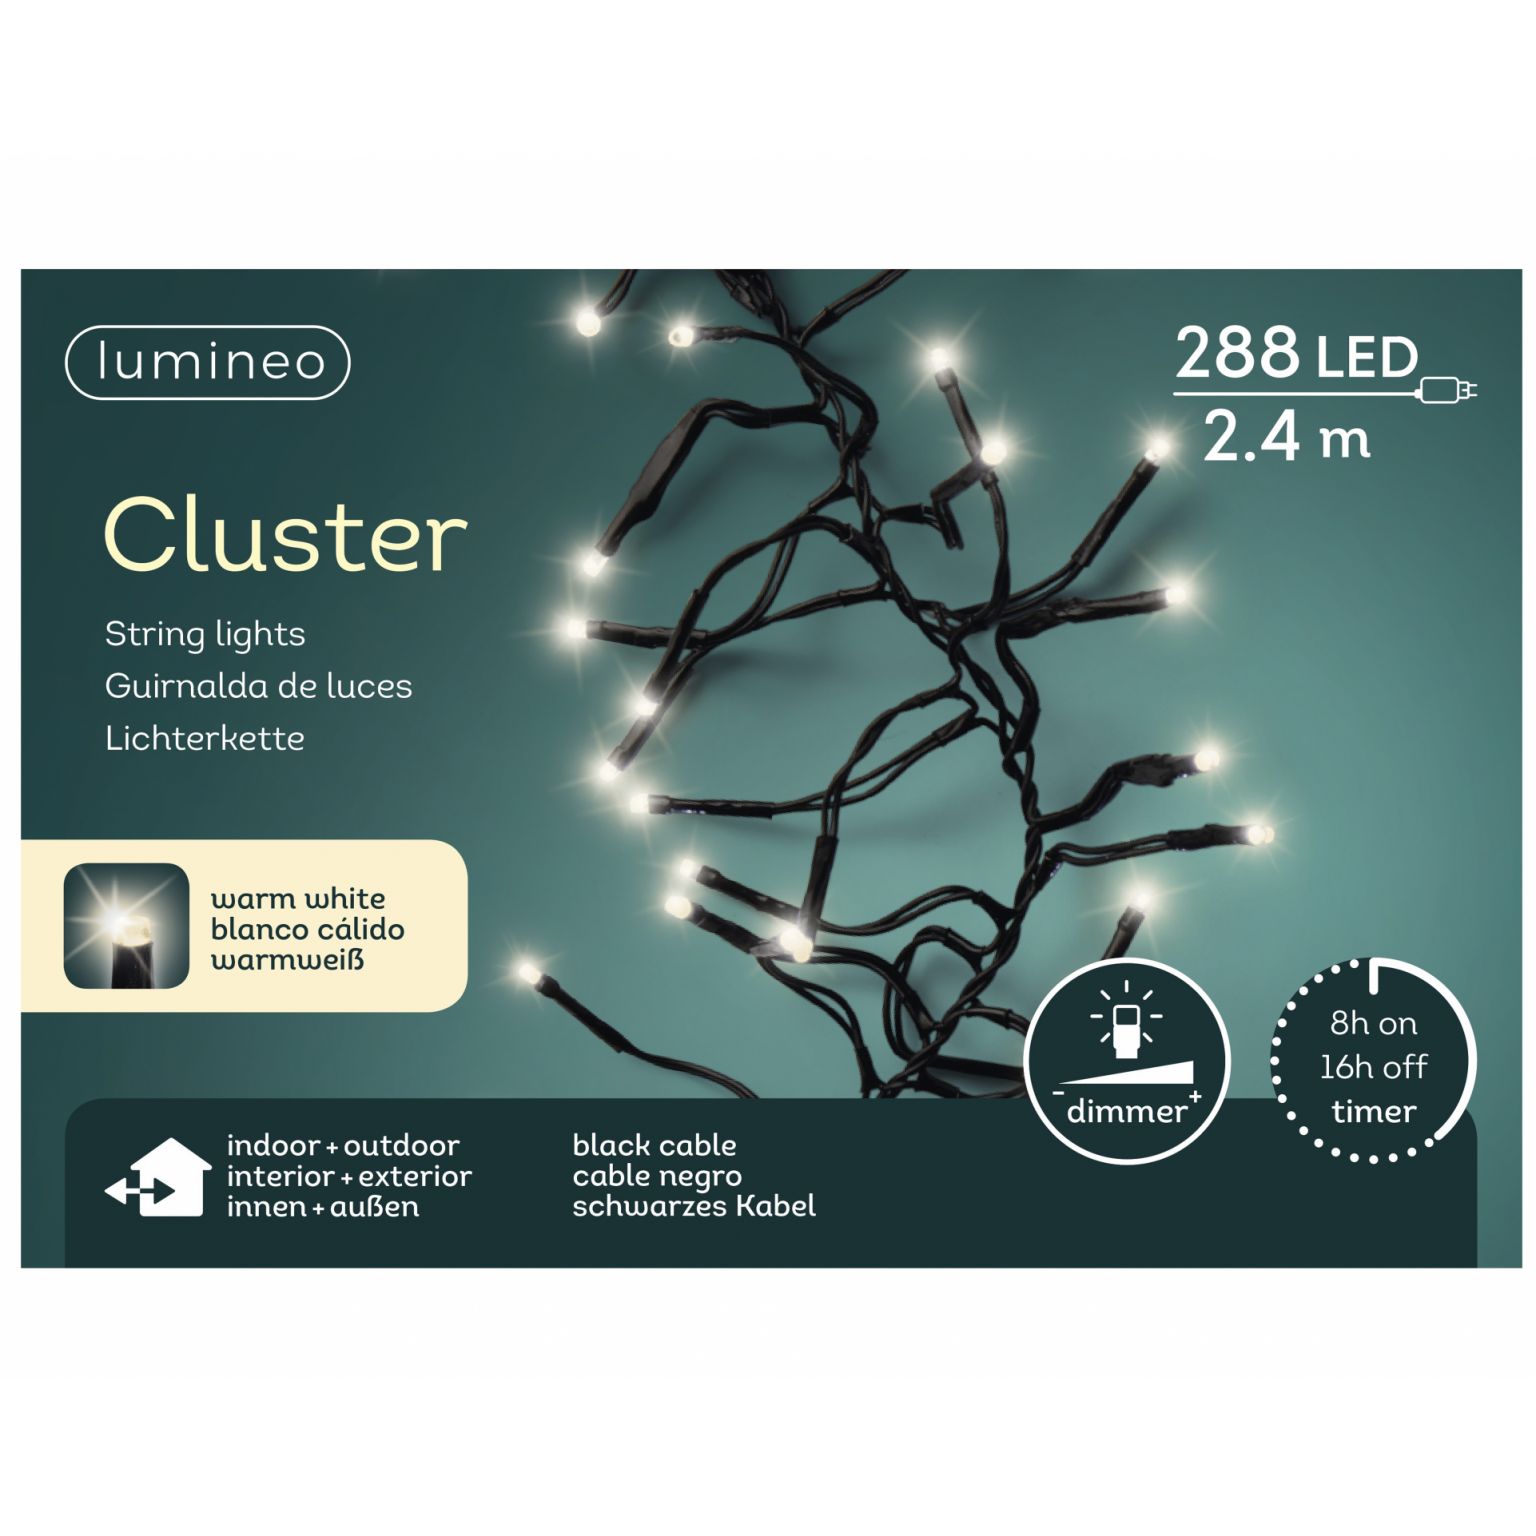 Clusterverlichting lumineo 288-lamps LED 'warm wit'